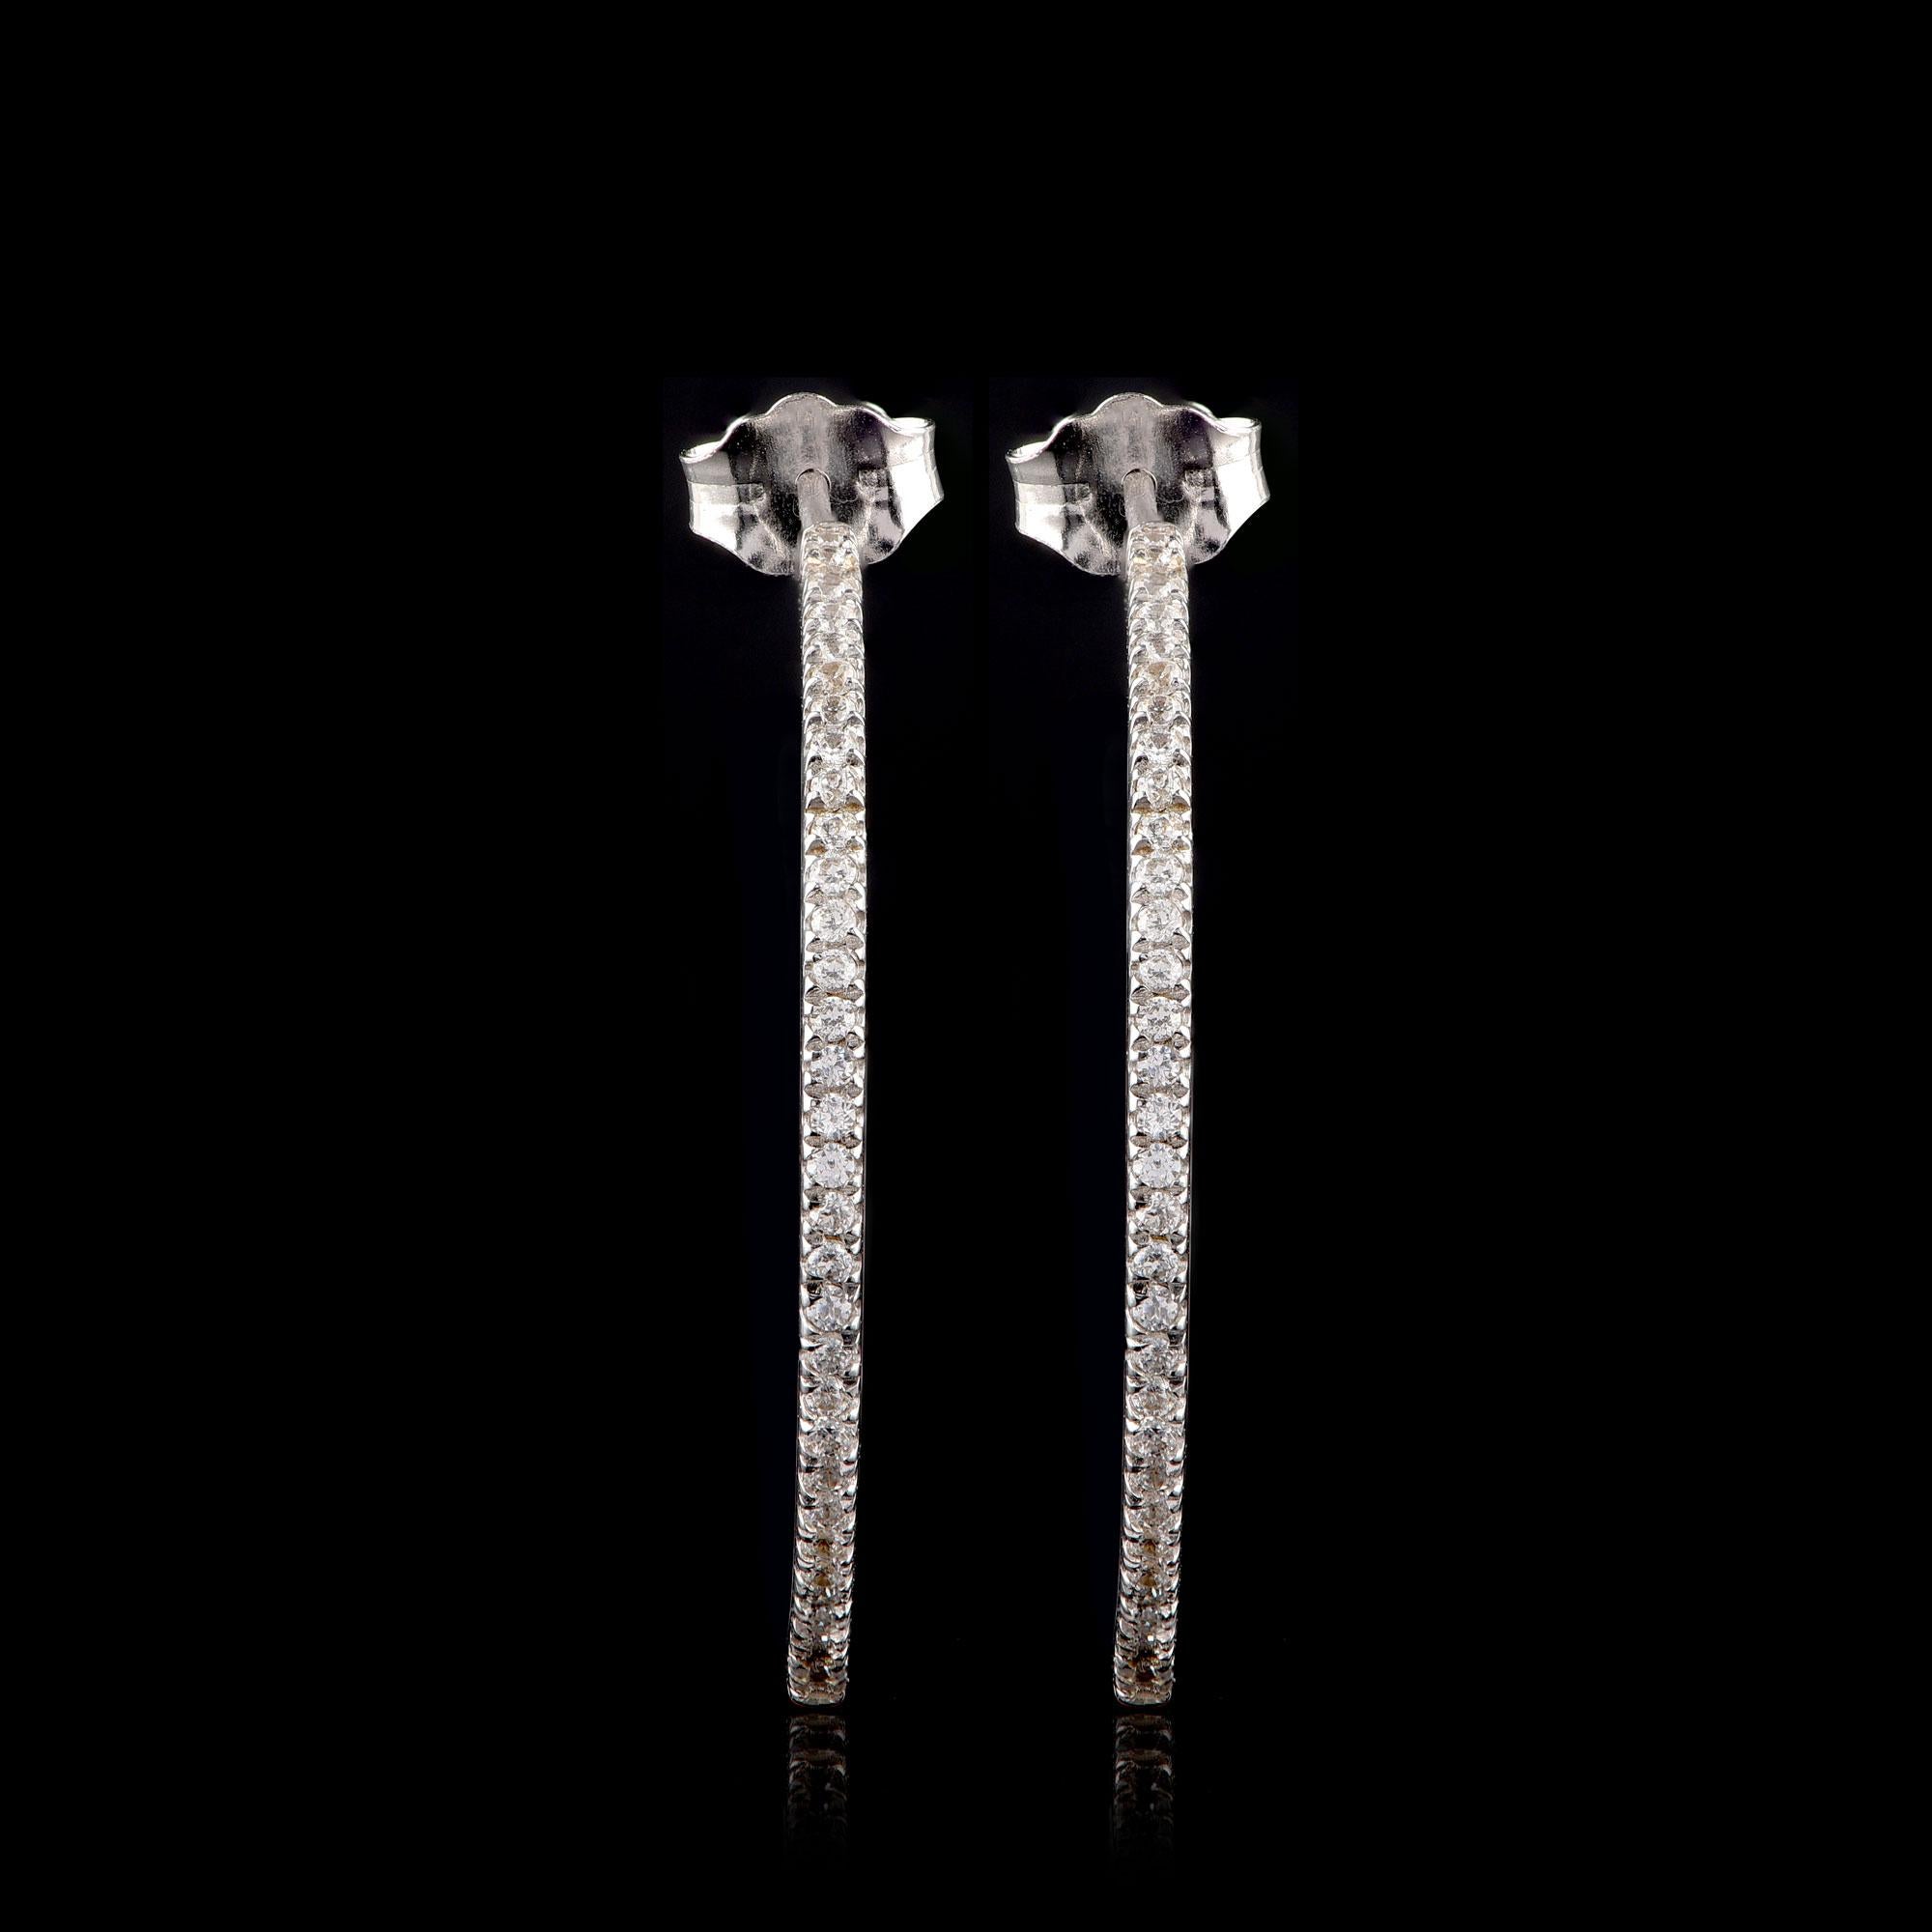 These designer hoop earrings feature 118 brilliant-cut diamond set in prong setting and hand-crafted by our in-house experts in 18-karat white gold. The diamonds are graded H-I Color, I2 Clarity.